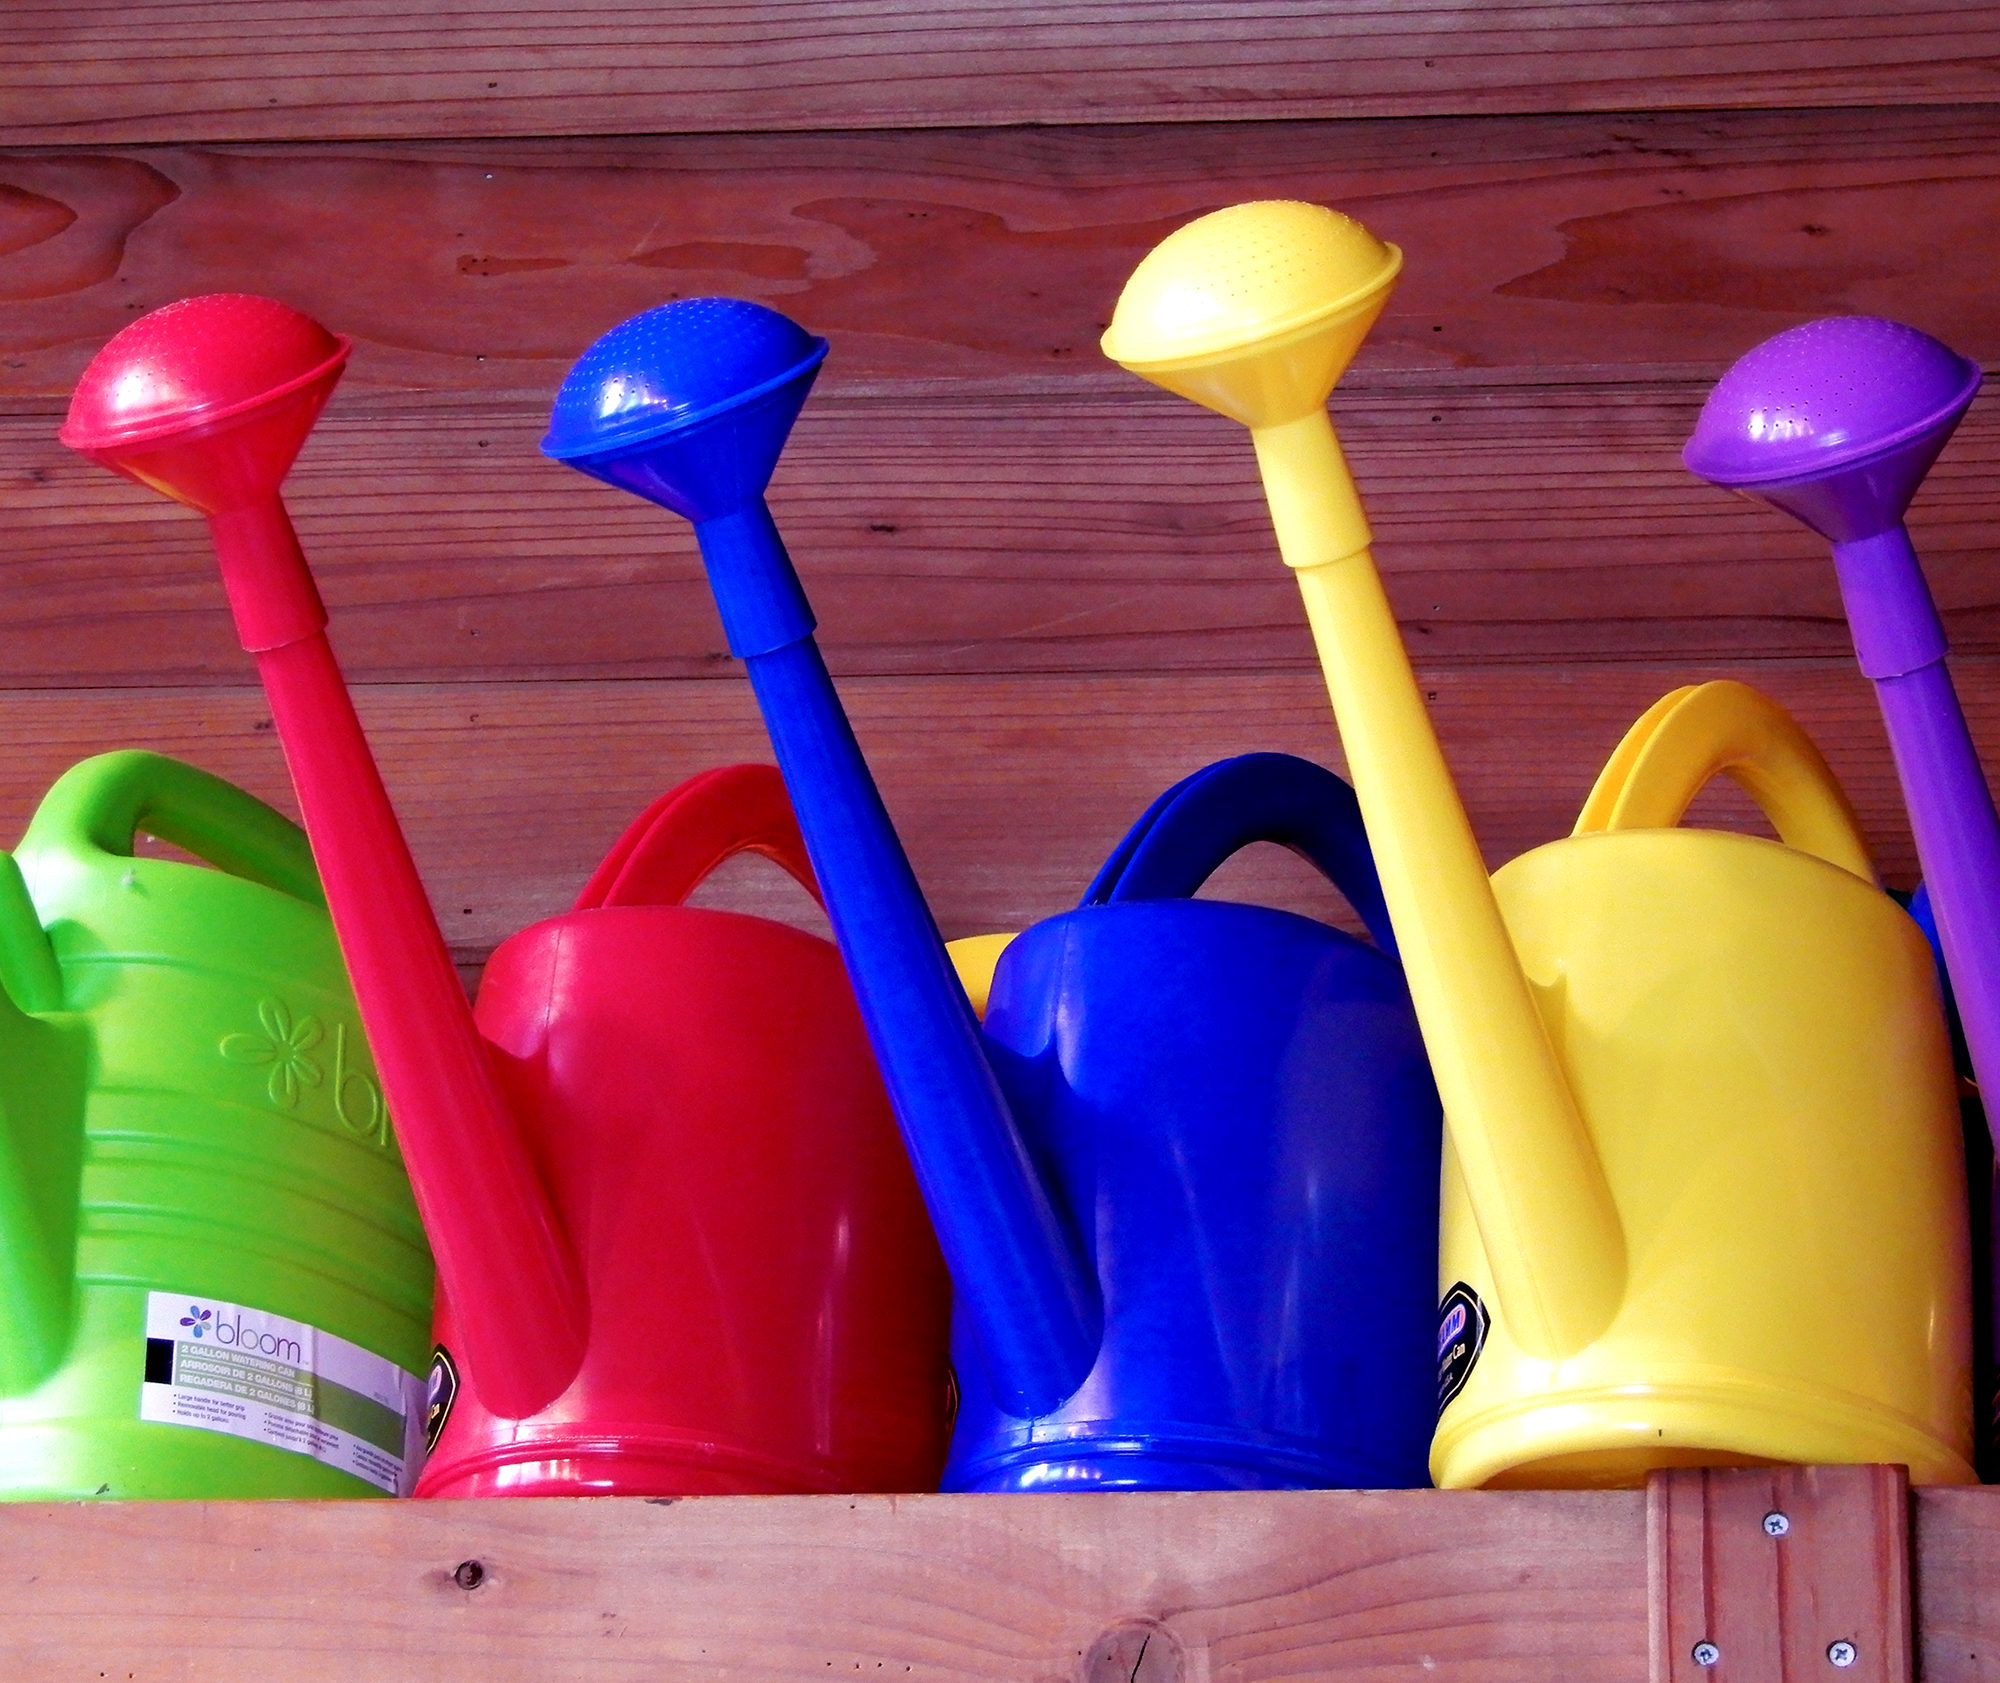 watering cans - Photo by Helen Krayenhoff